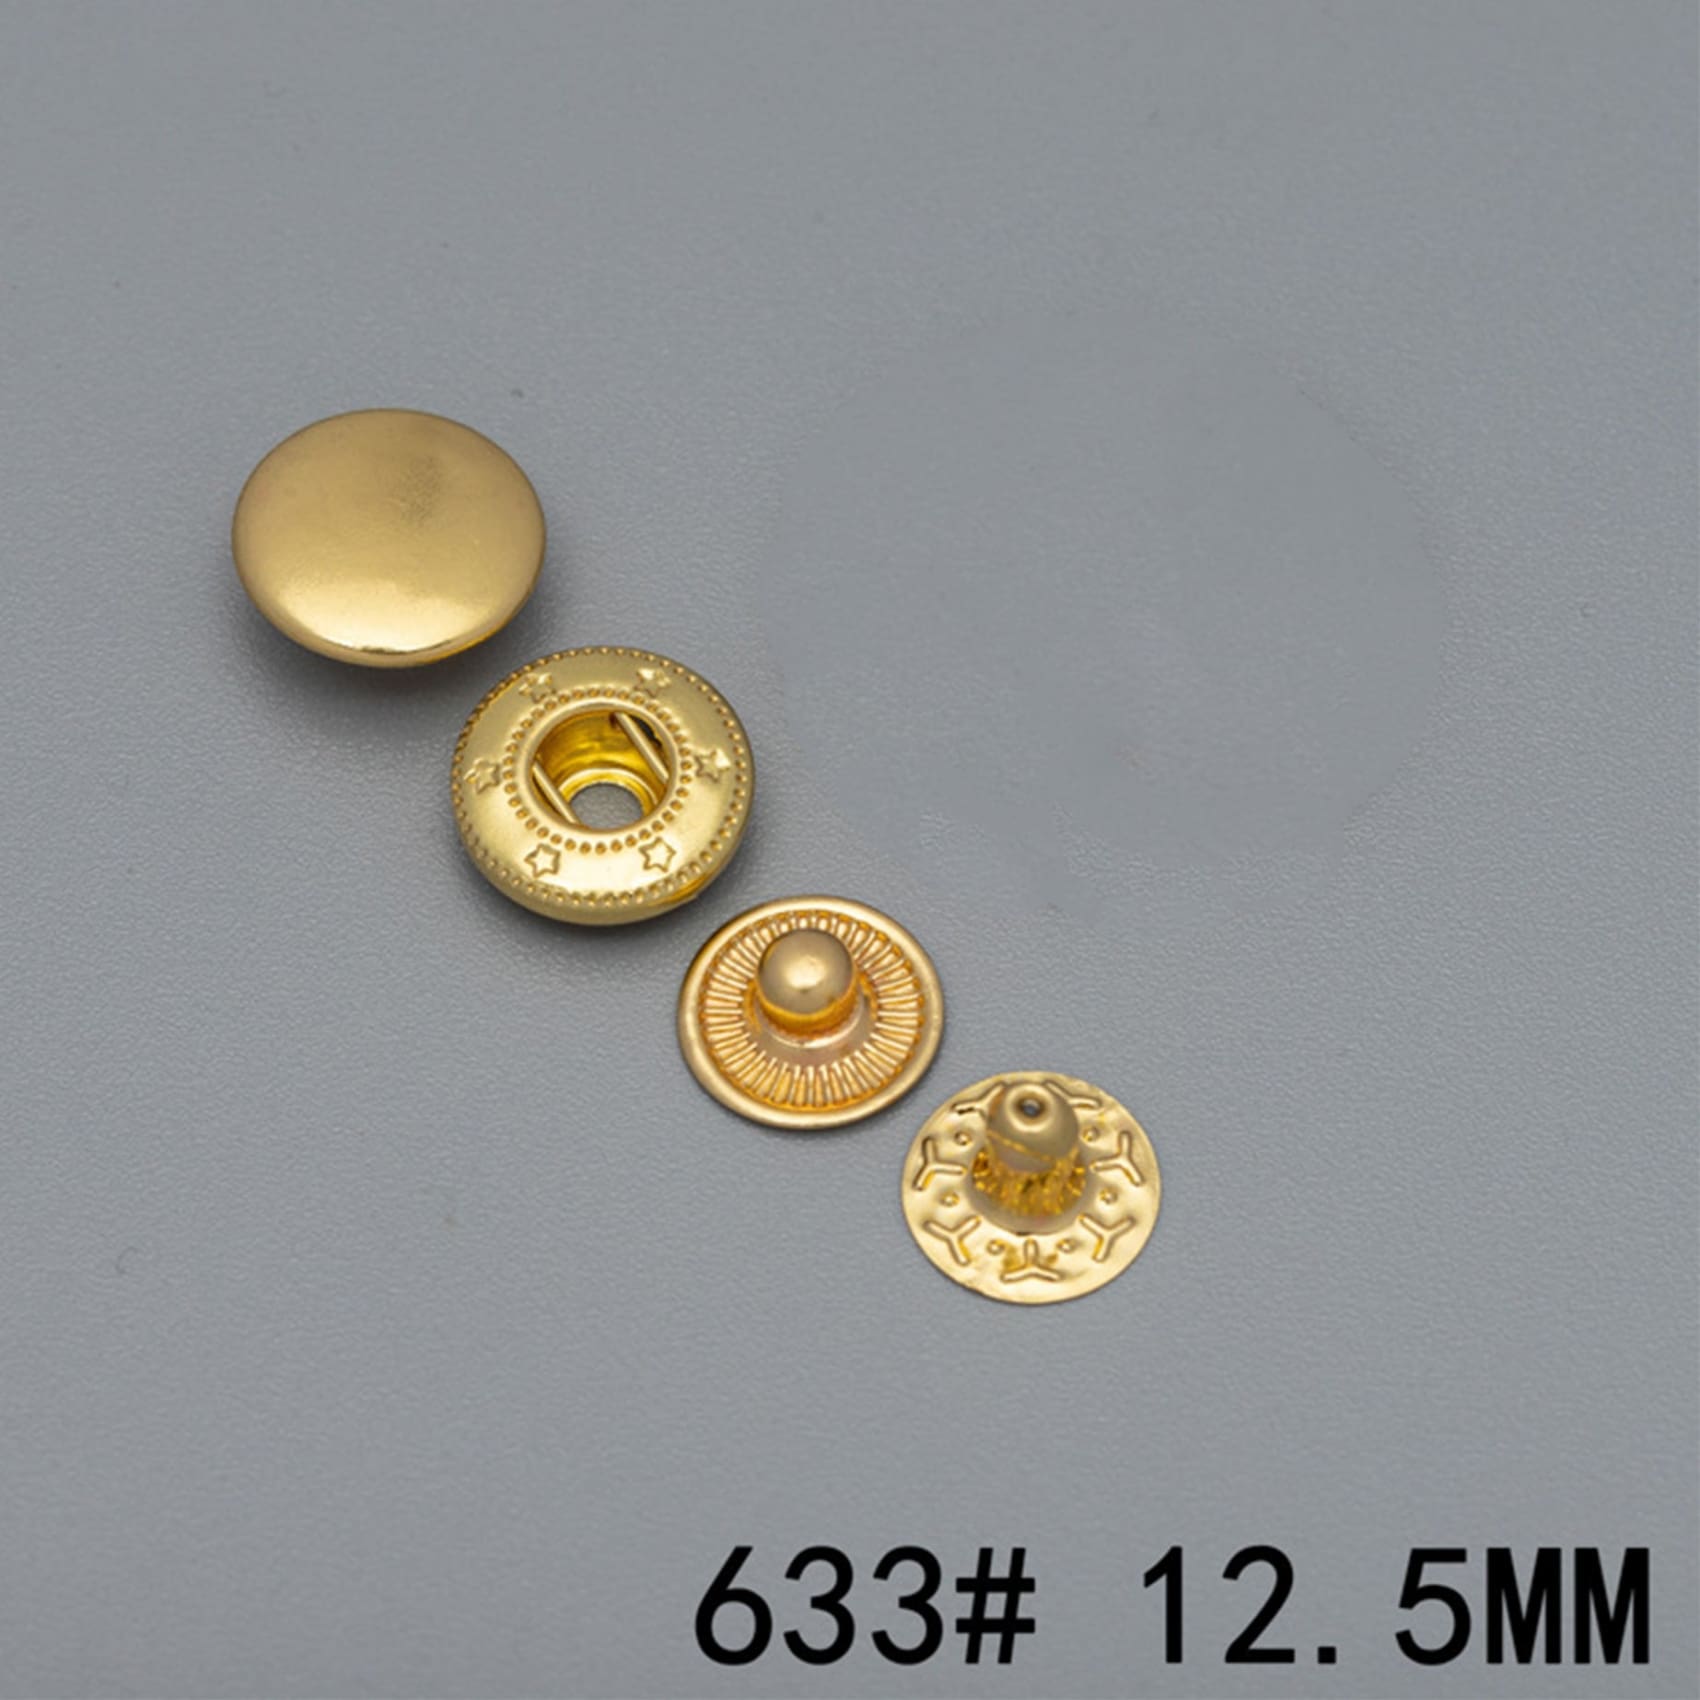 12.5mm Brass Snap Button Leather Craft Fastener Closure - 10pcs - Buttons & Snaps